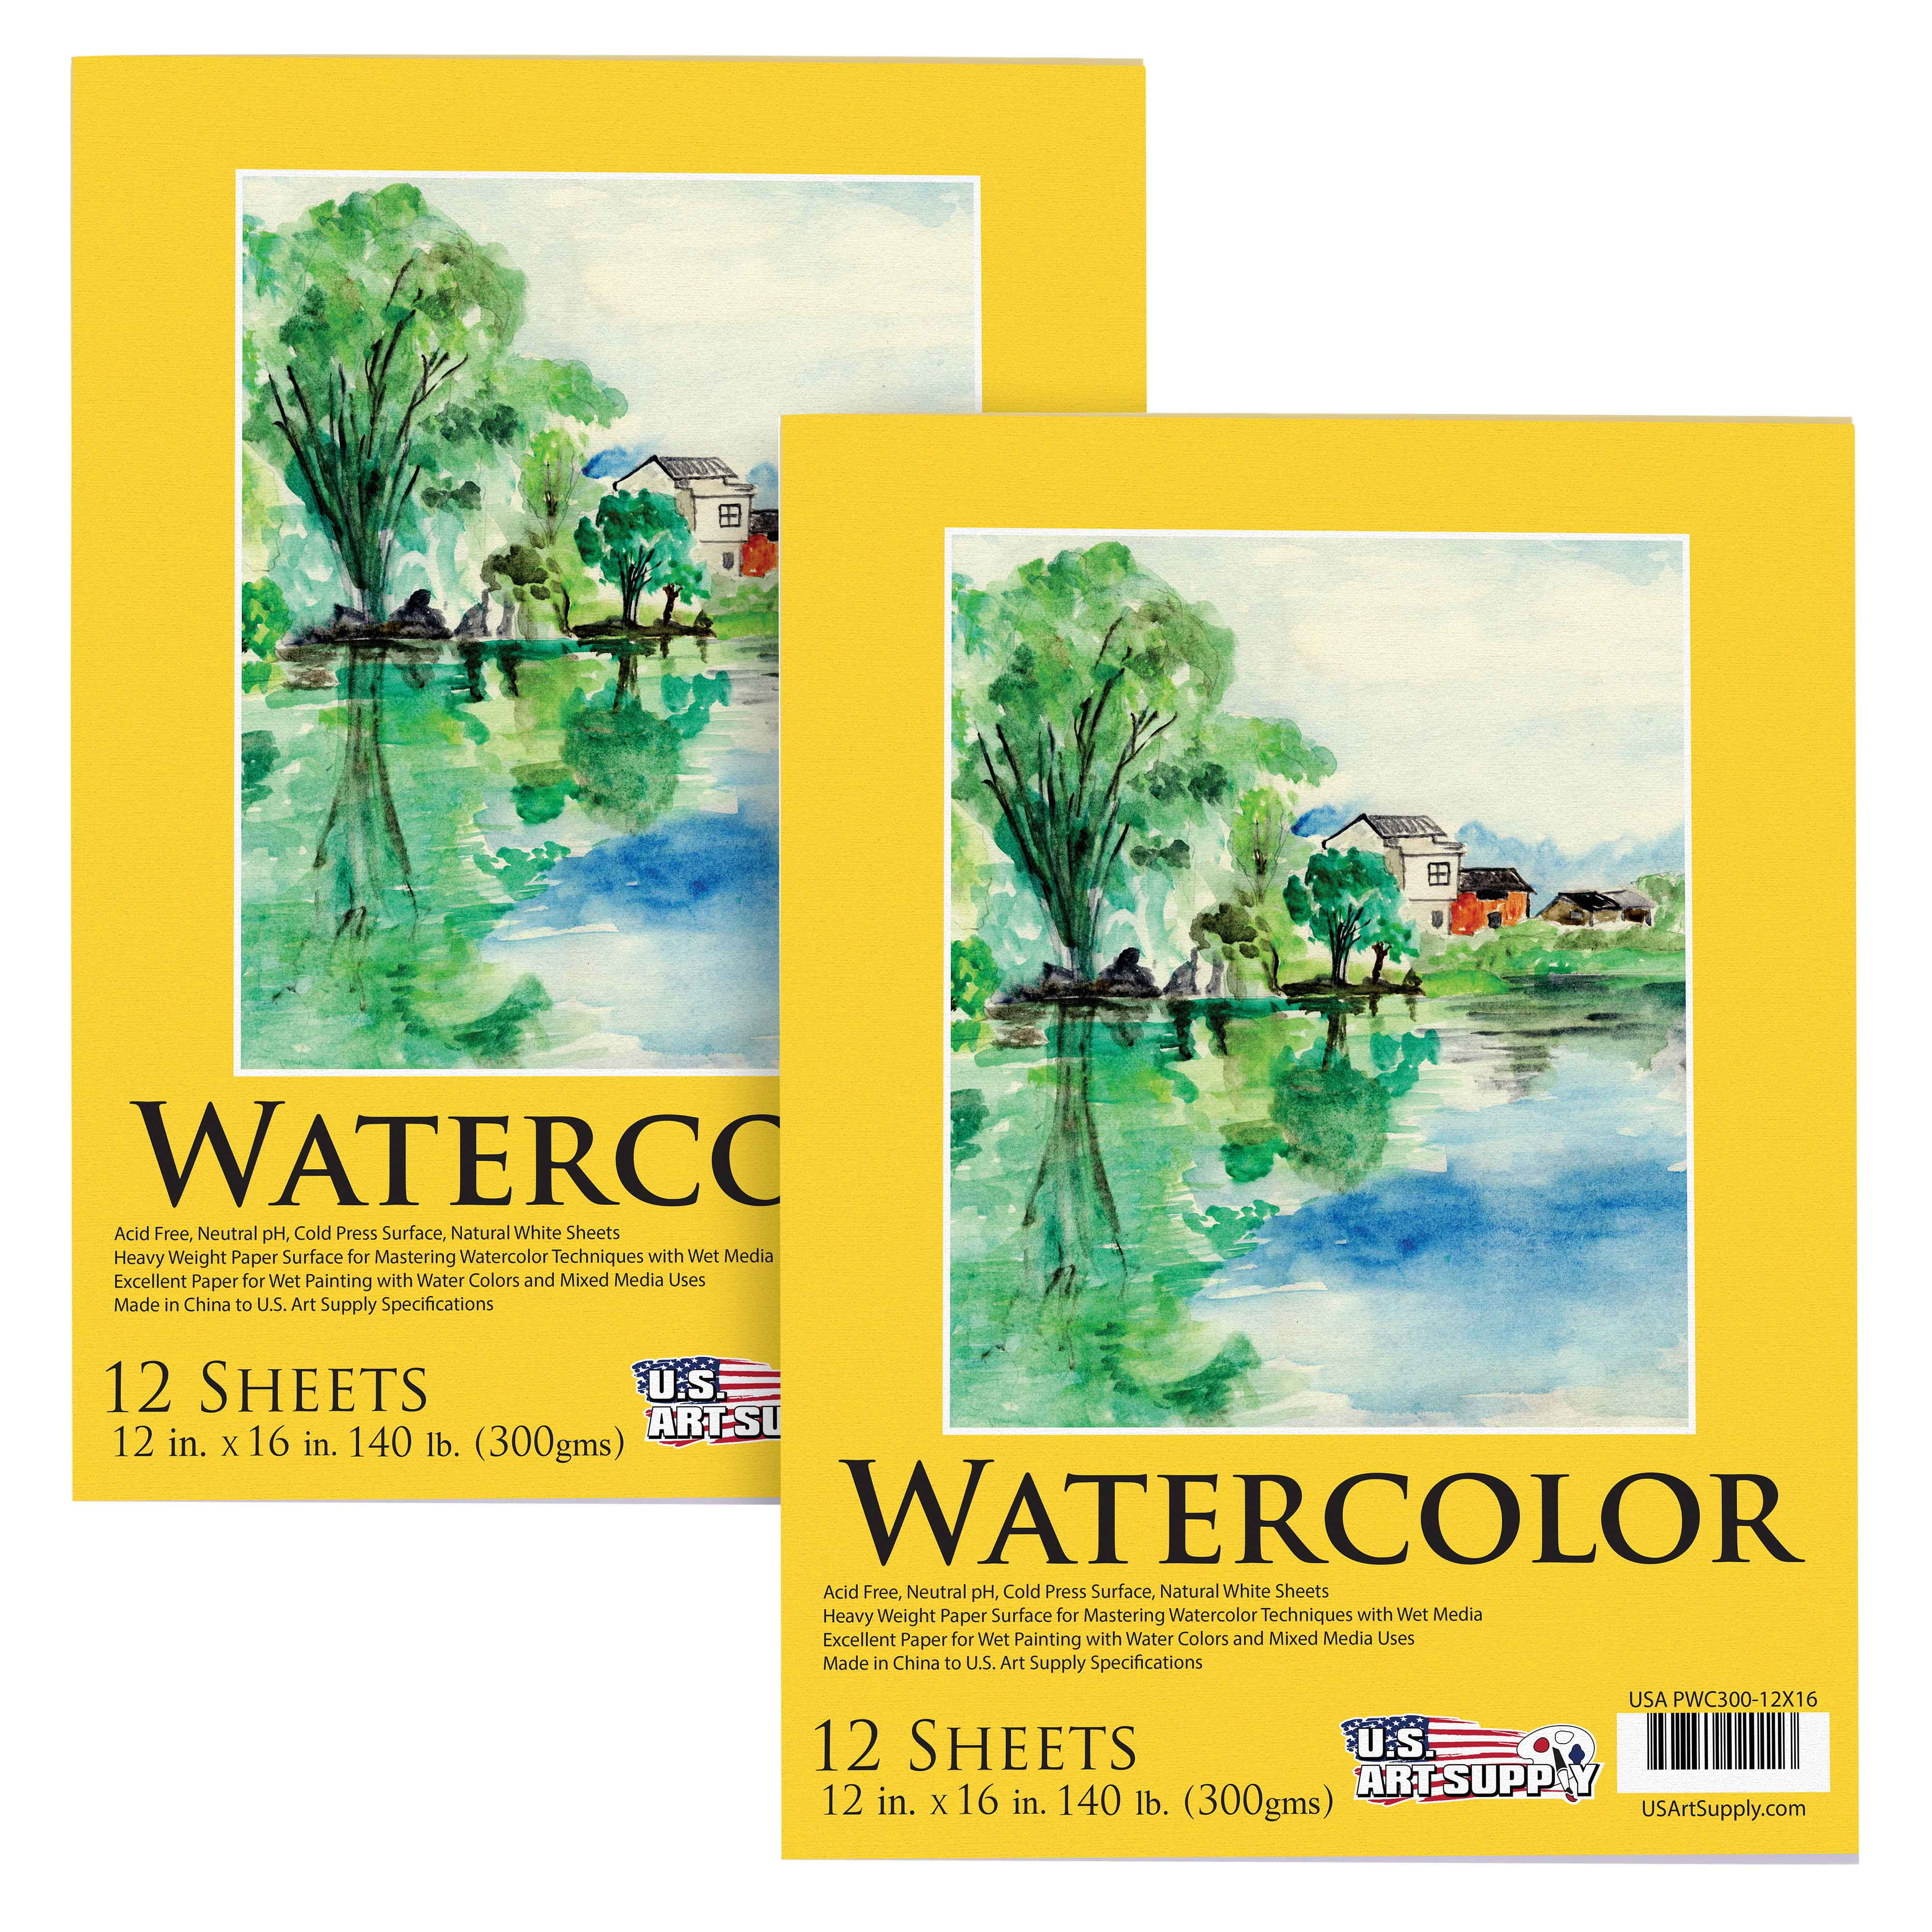  SEWACC 50 Sheets 8k Watercolor Paper Colored Printer Paper  White Printer Paper Easel Paper Painting Paper Accessory Making Paper Copy  Paper Painting Starter Supply School Supply Card a4 : Arts, Crafts